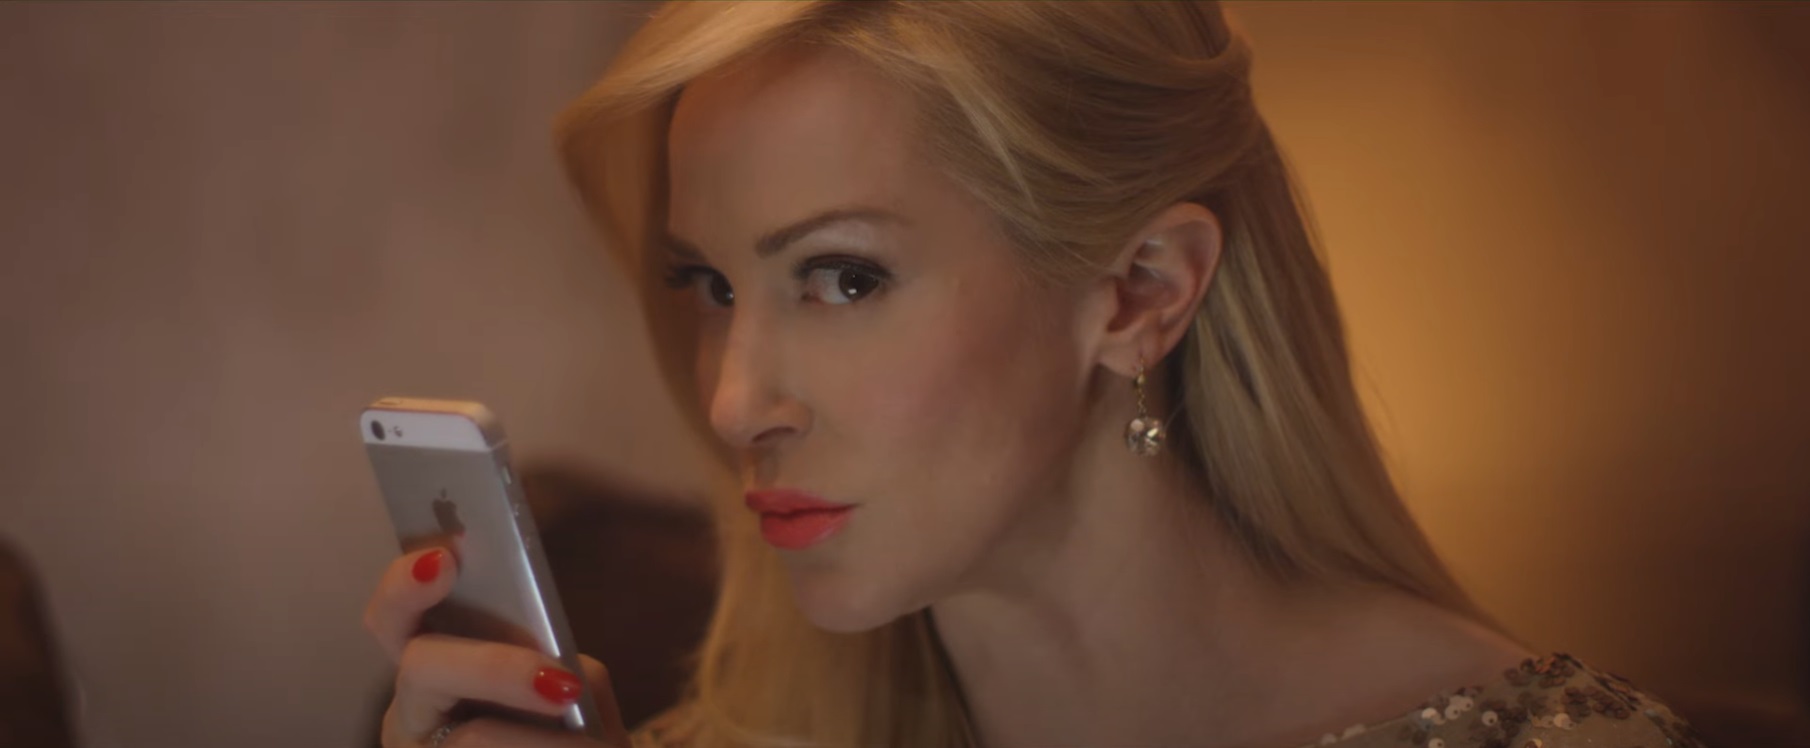 Chick Flick | Louise Linton on the Comedy of Online Dating